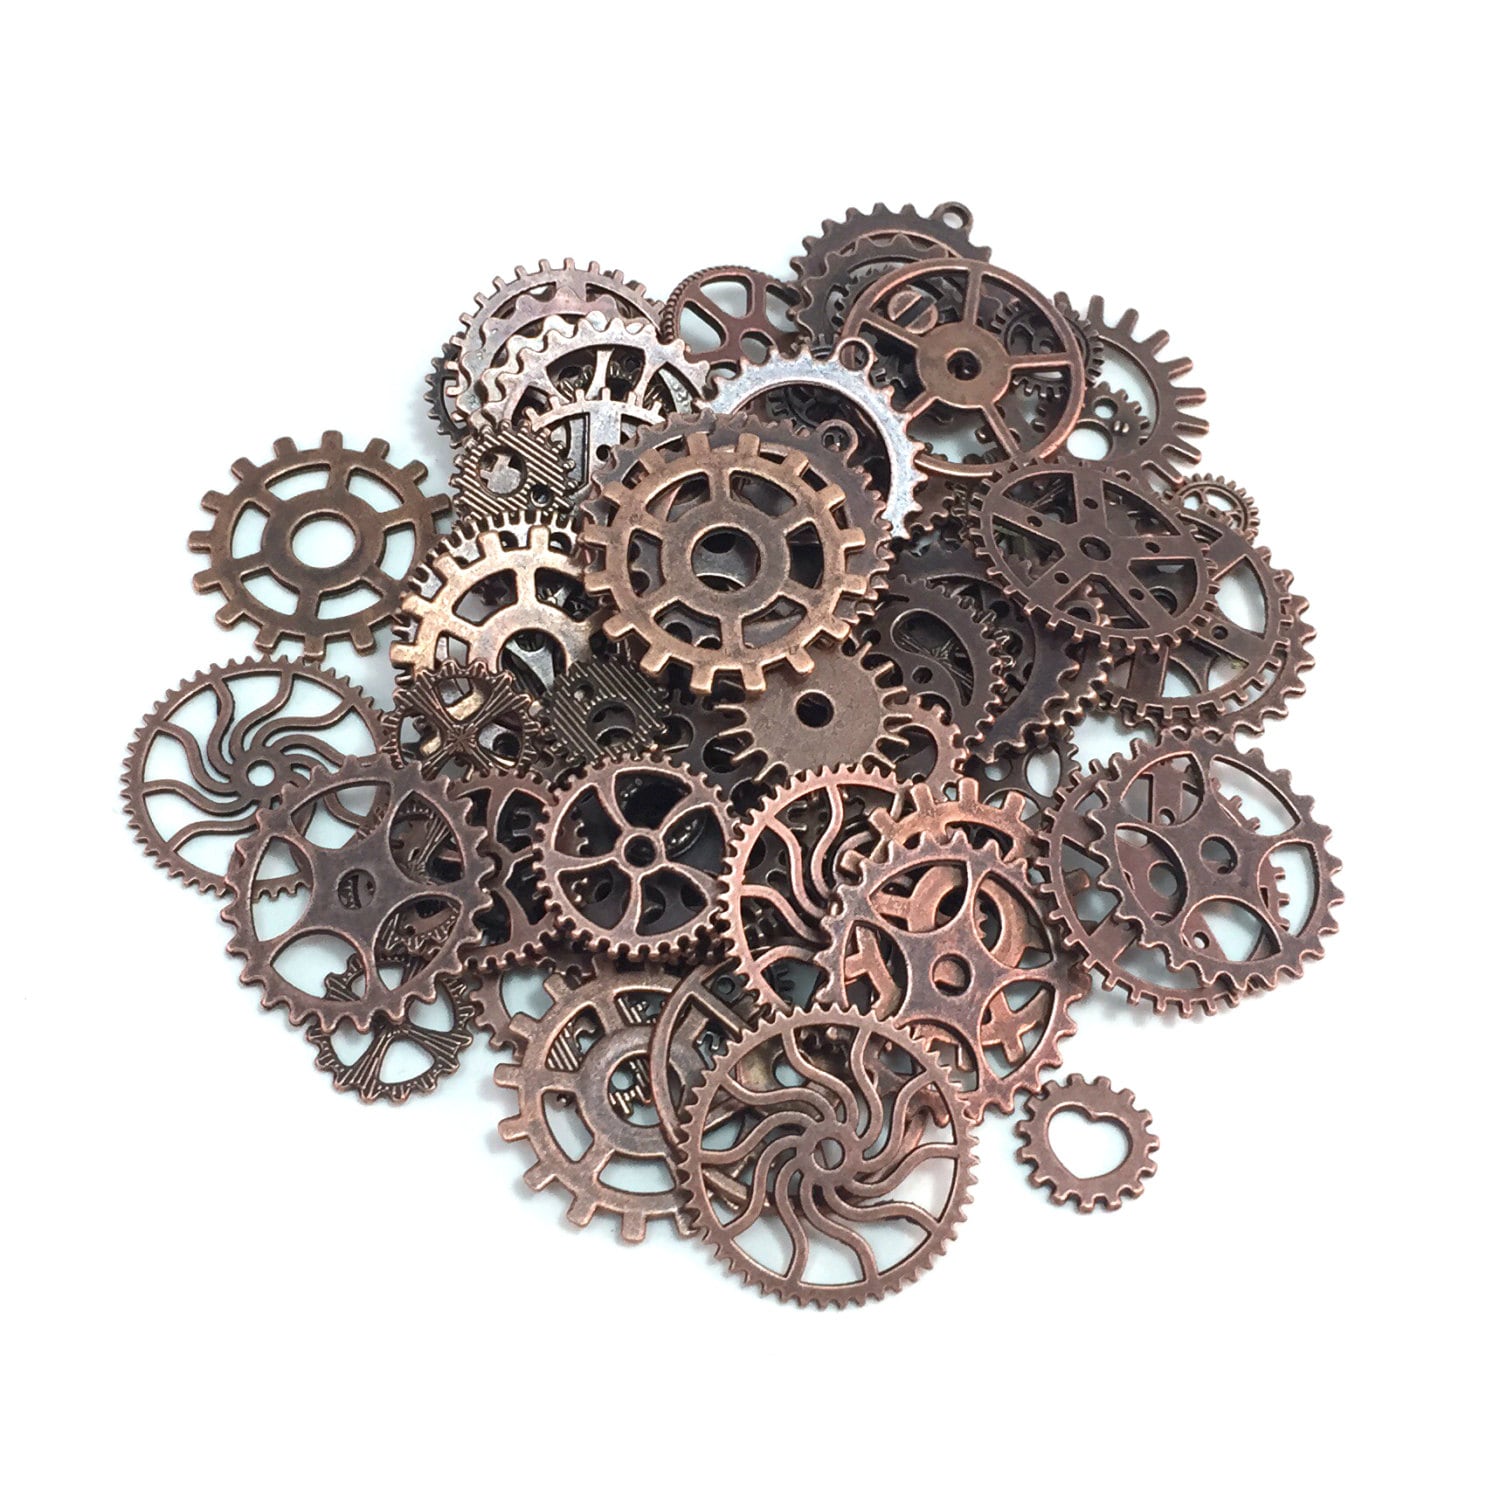 100 Steampunk Cogs Gears Machinery Mix Sizes/Designs